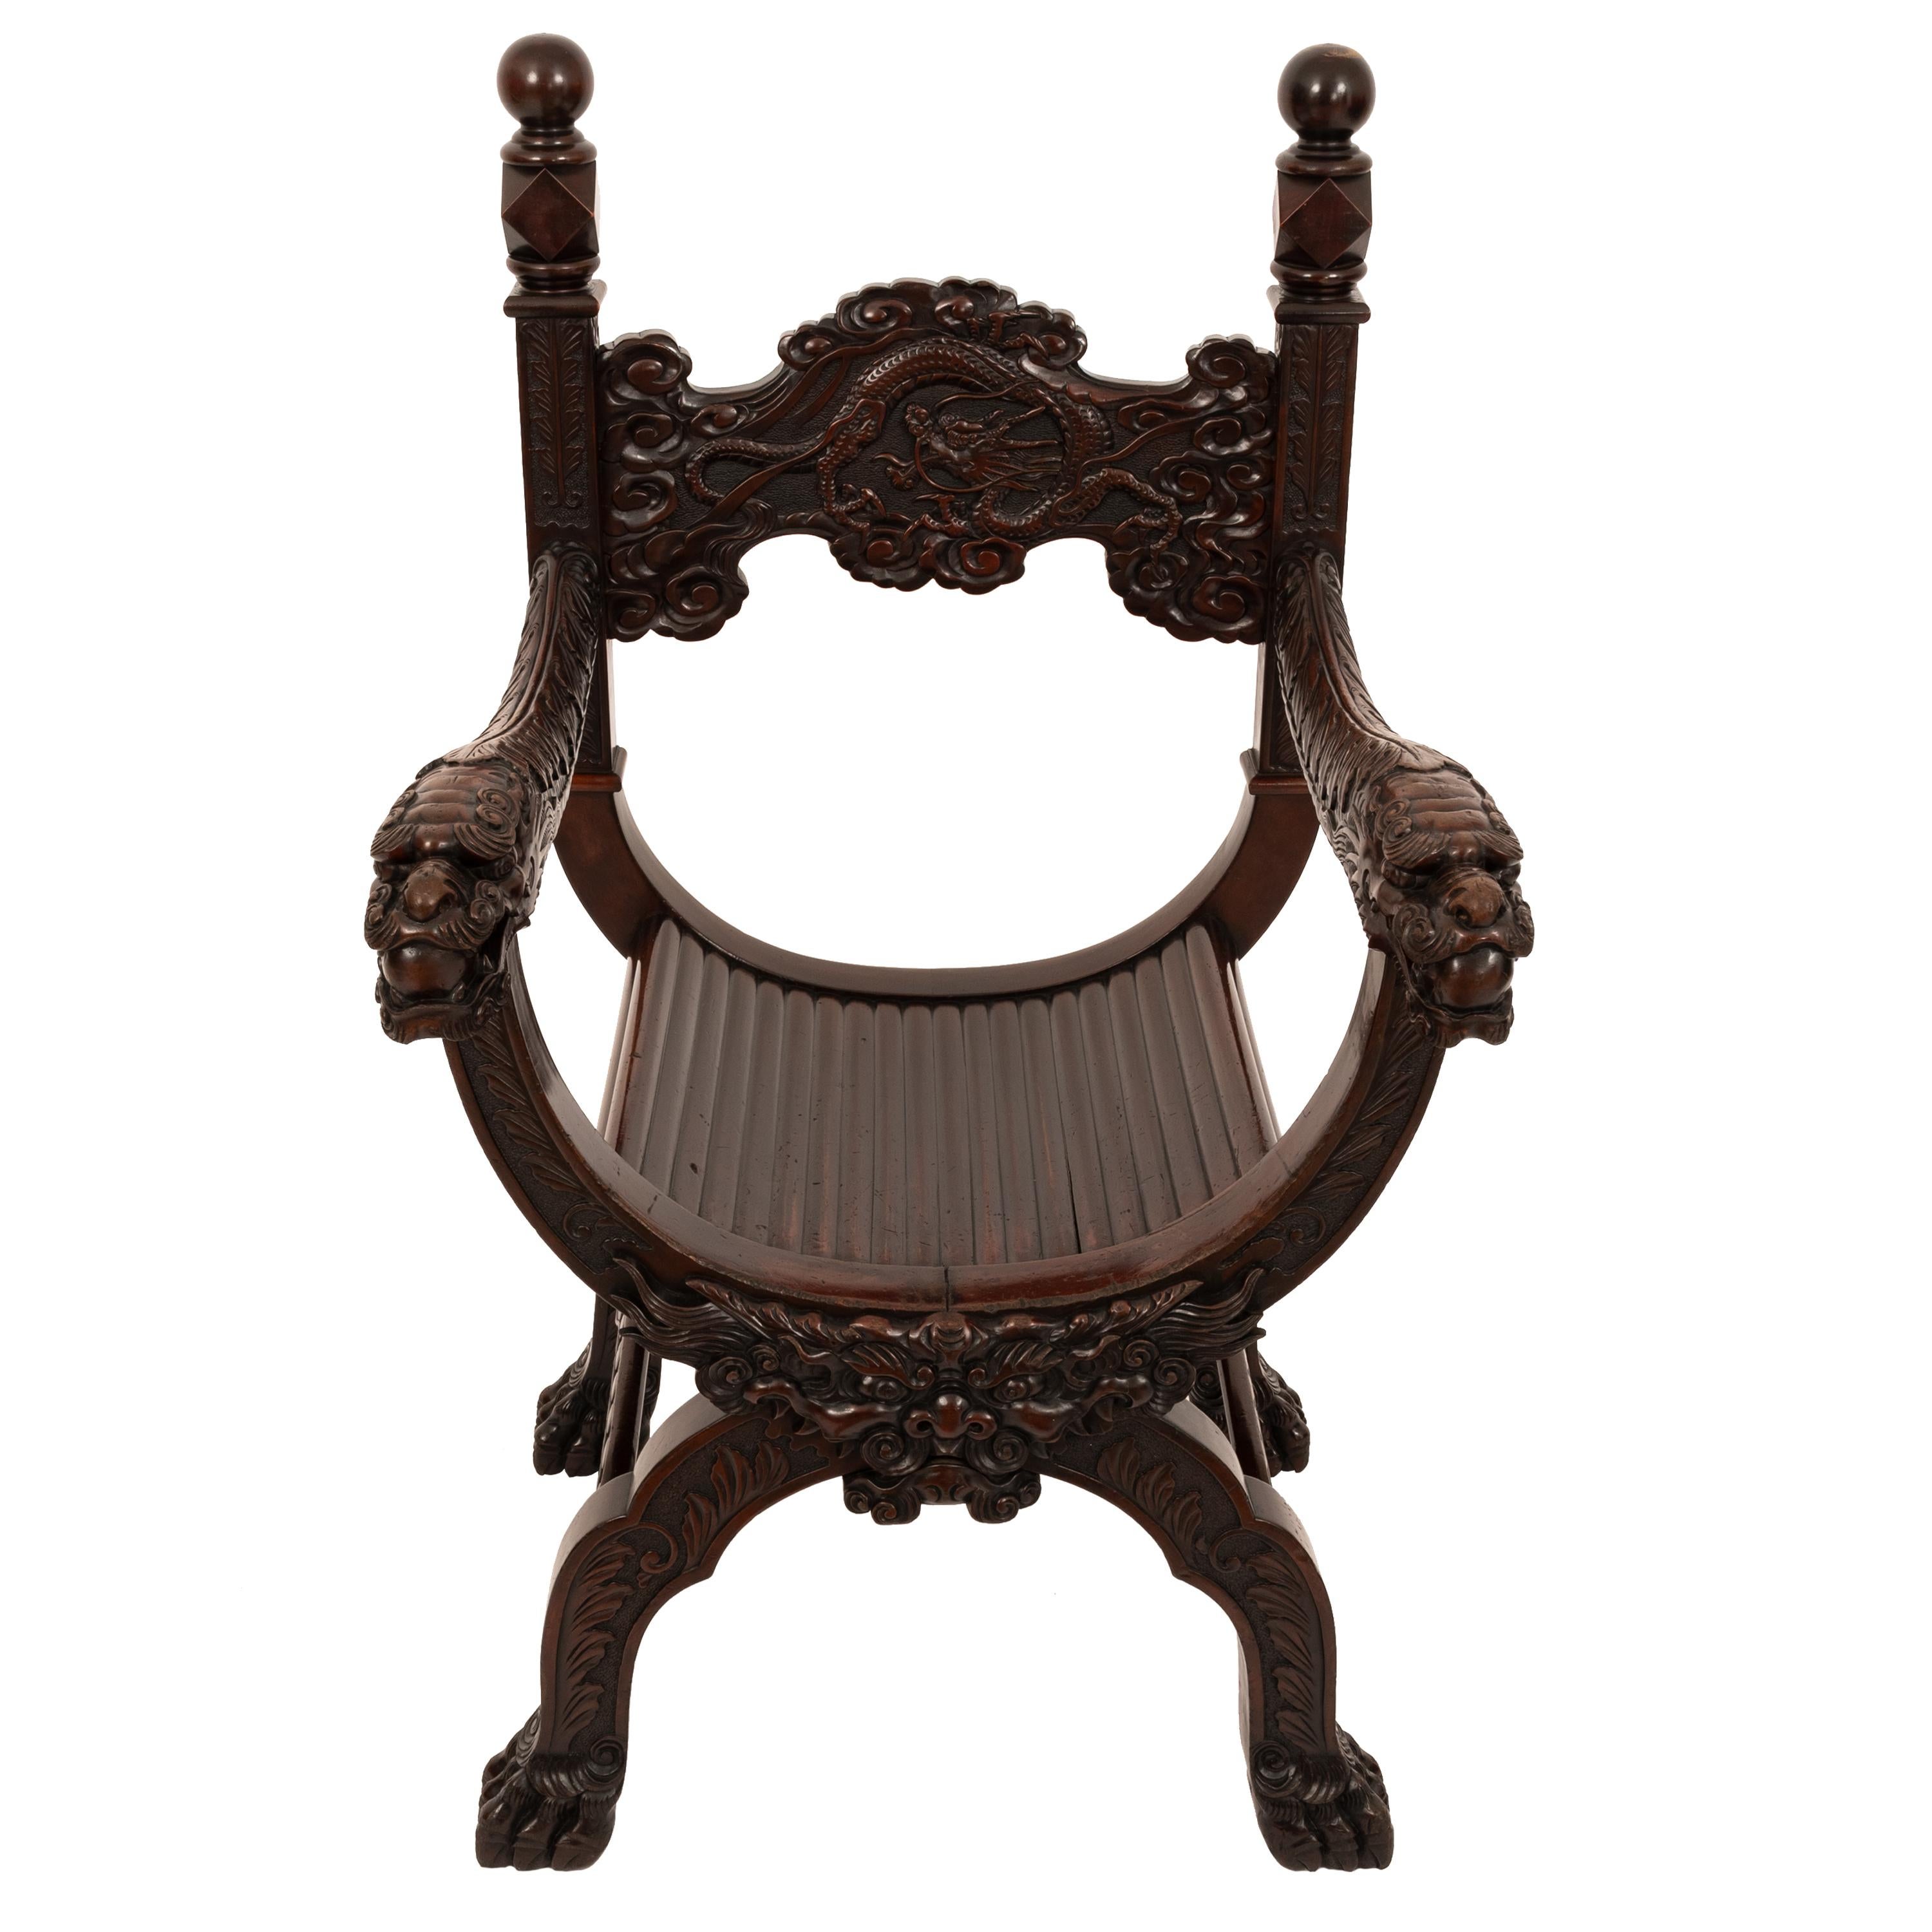 Antique American Robert Mitchell Carved Chinoiserie Savonarola Dragon Chair 1900 In Good Condition For Sale In Portland, OR